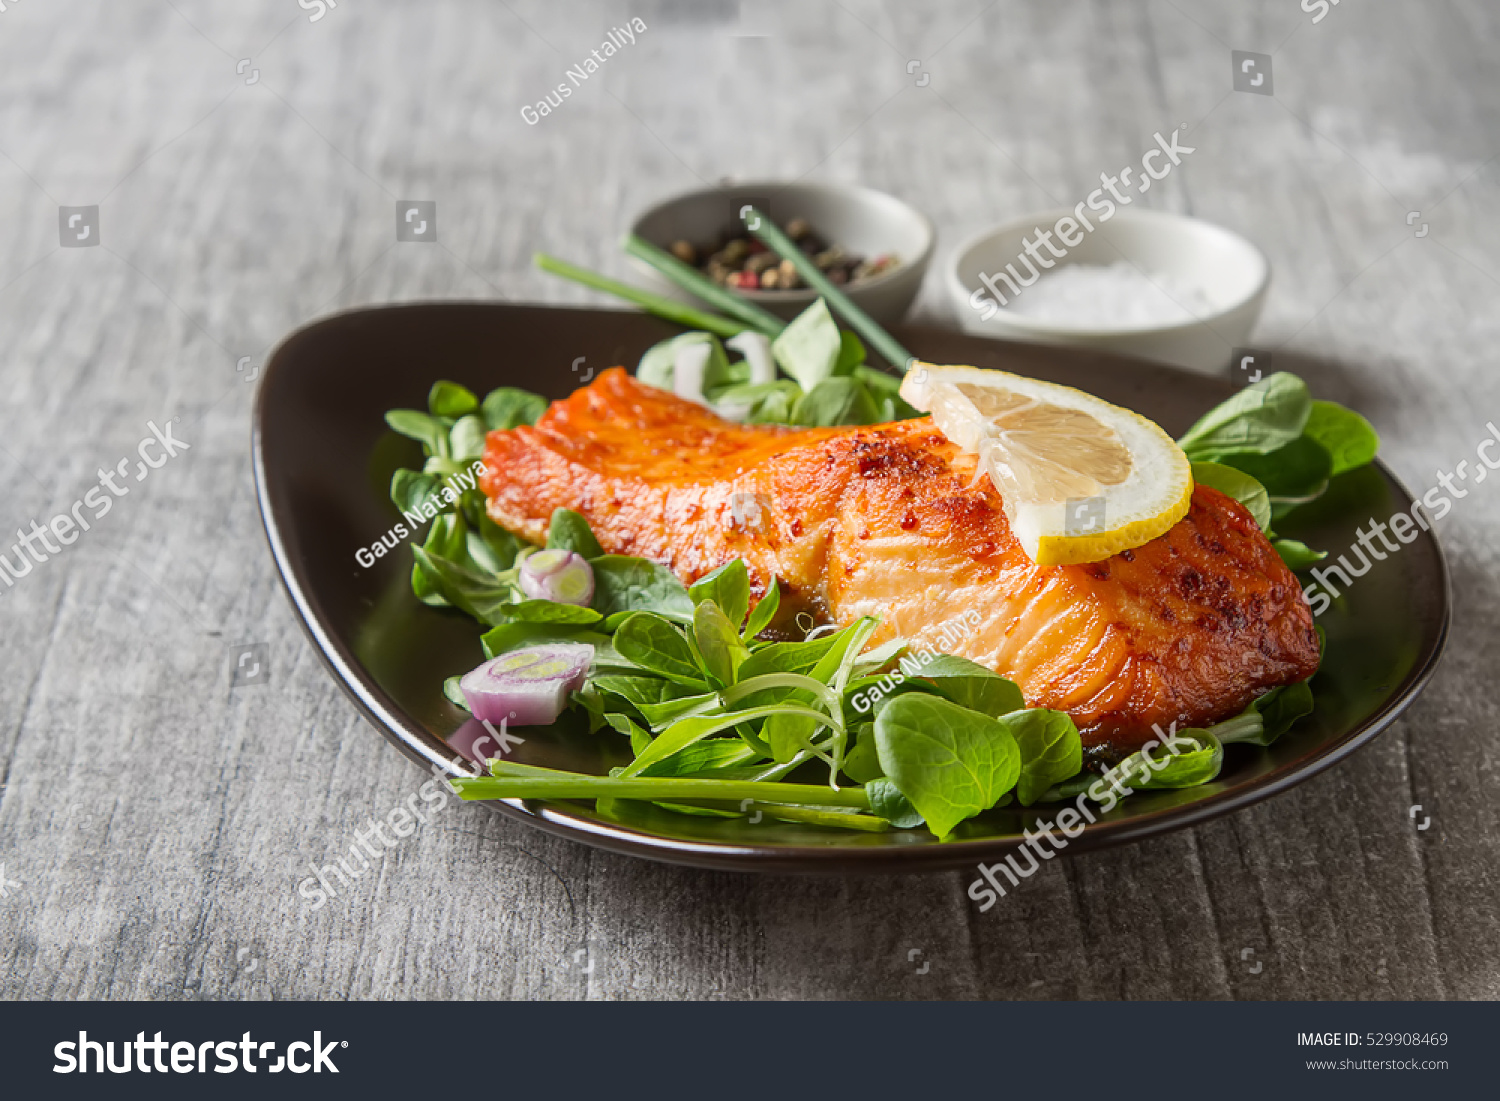 402,746 Salmon dishes Images, Stock Photos & Vectors | Shutterstock